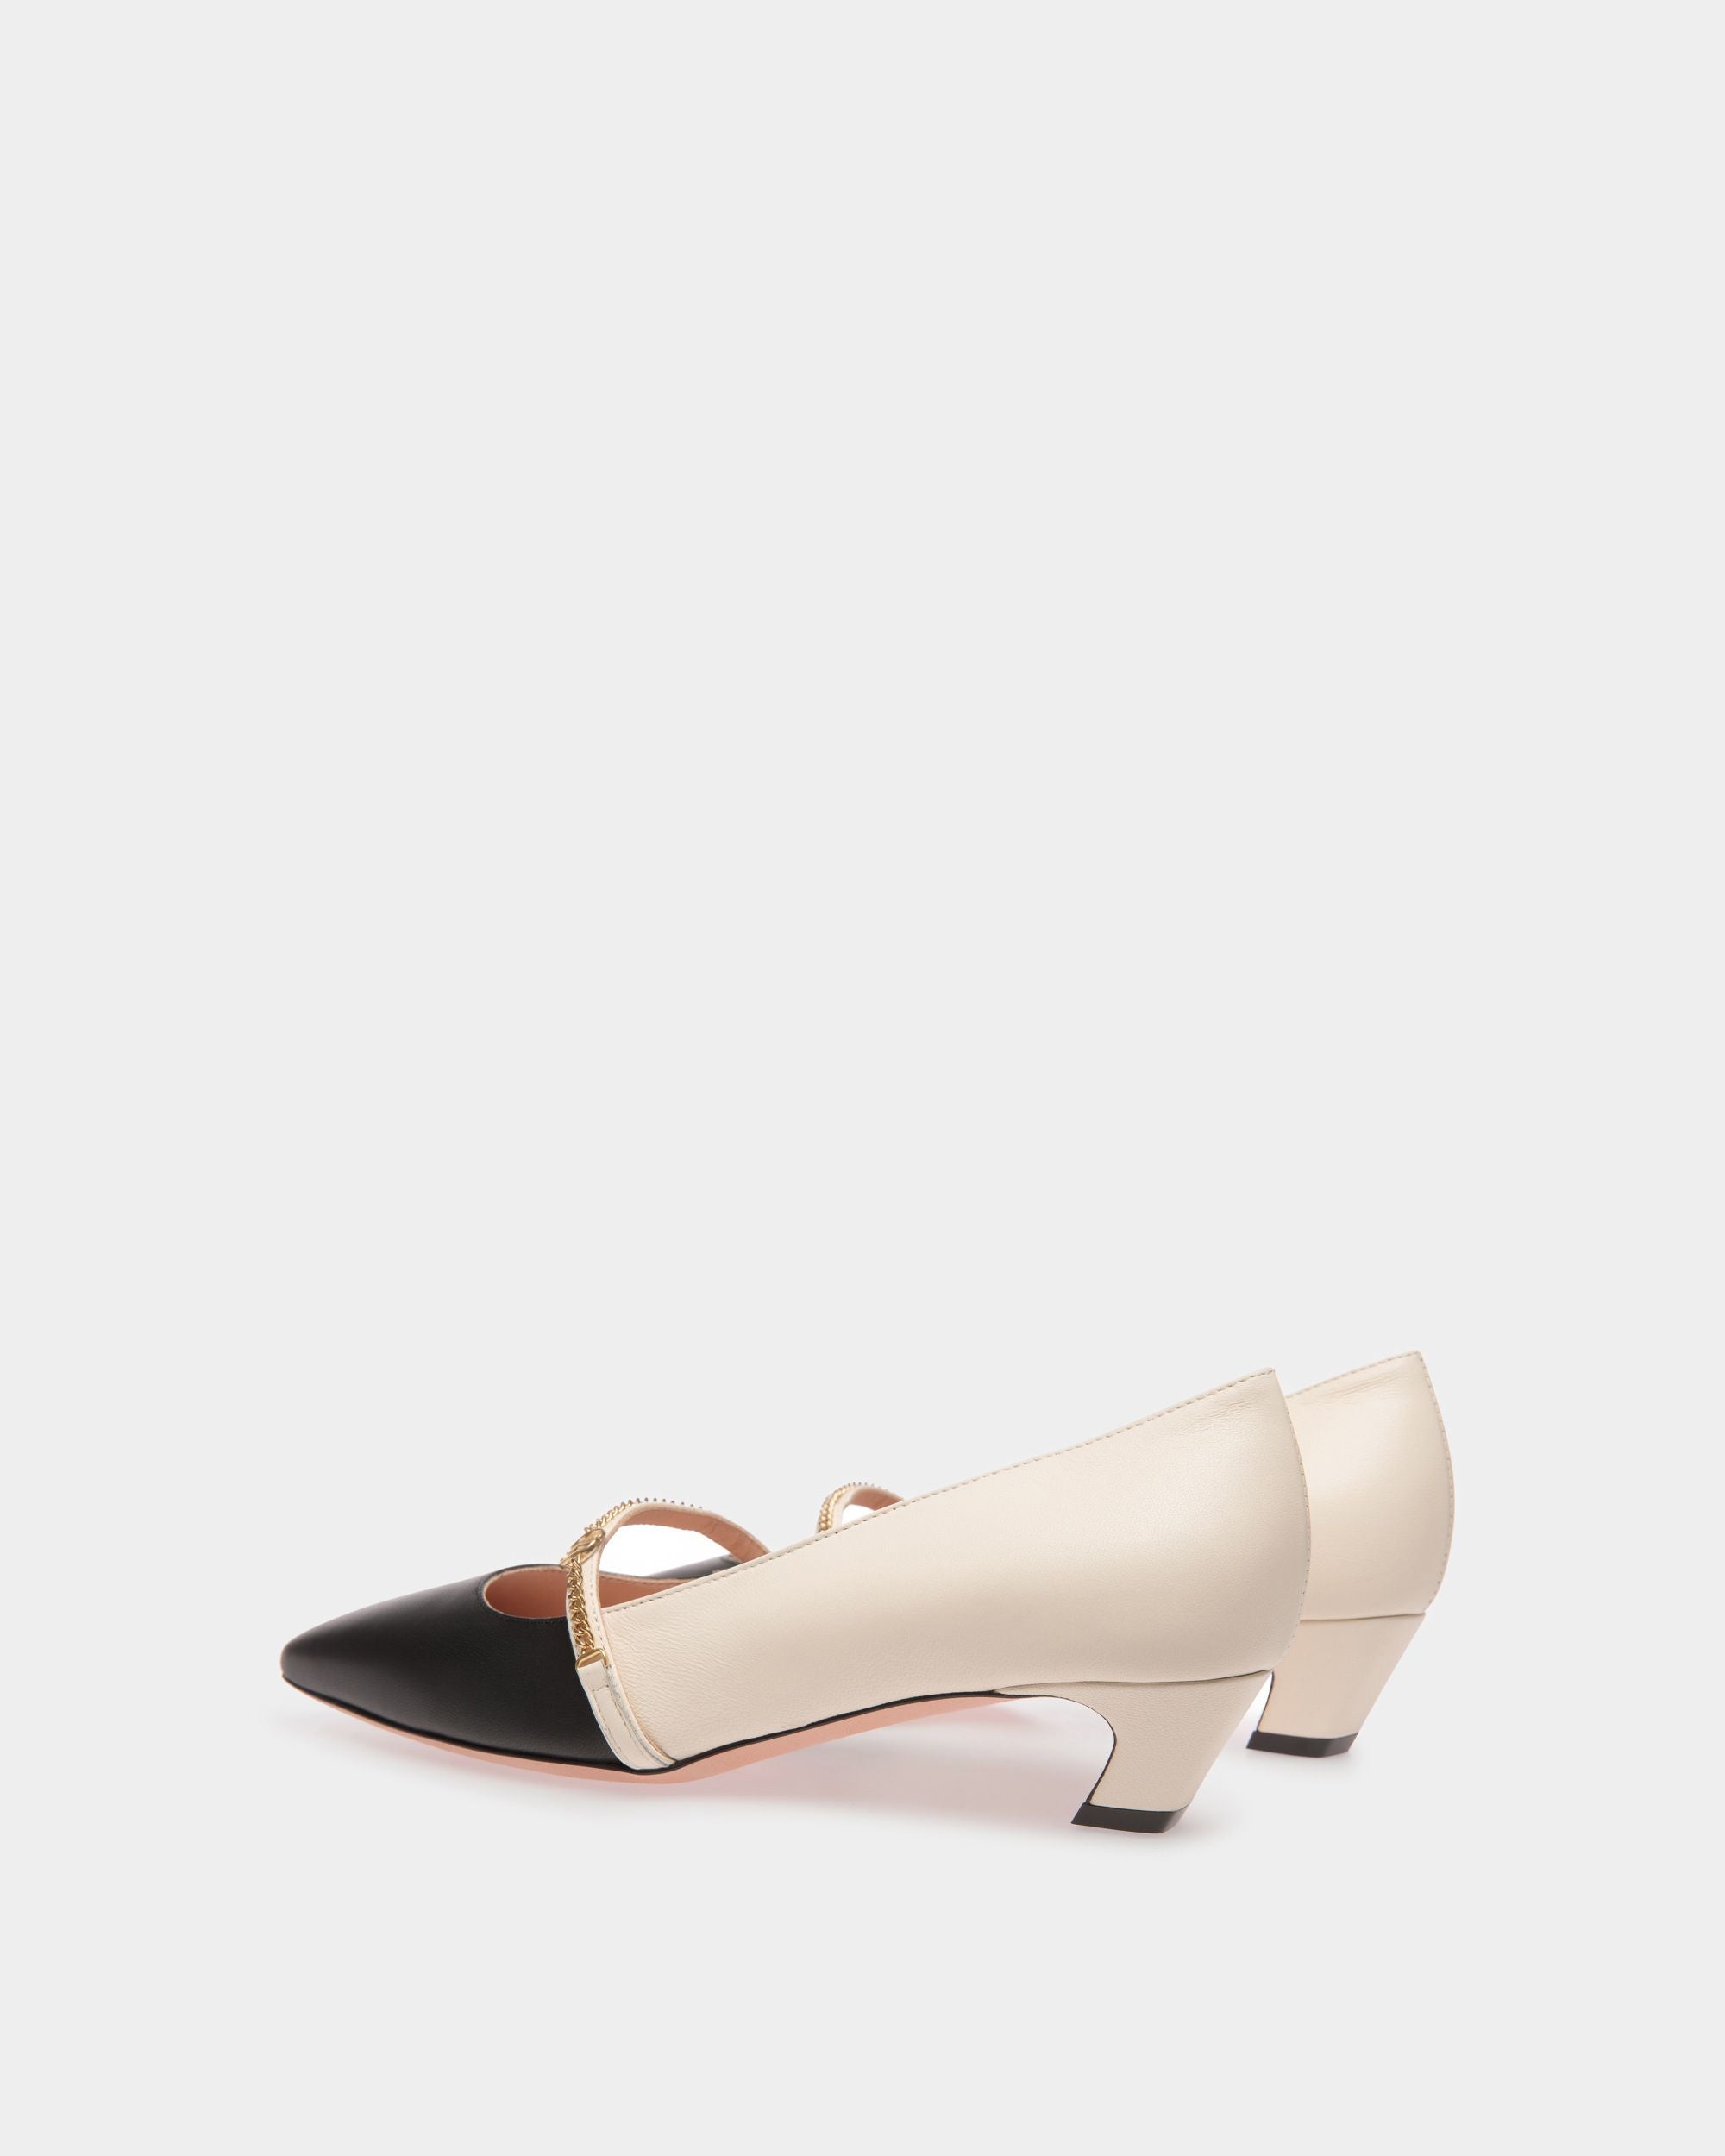 Sylt | Women's Mary-Jane Pump in Black And White Leather | Bally | Still Life 3/4 Back